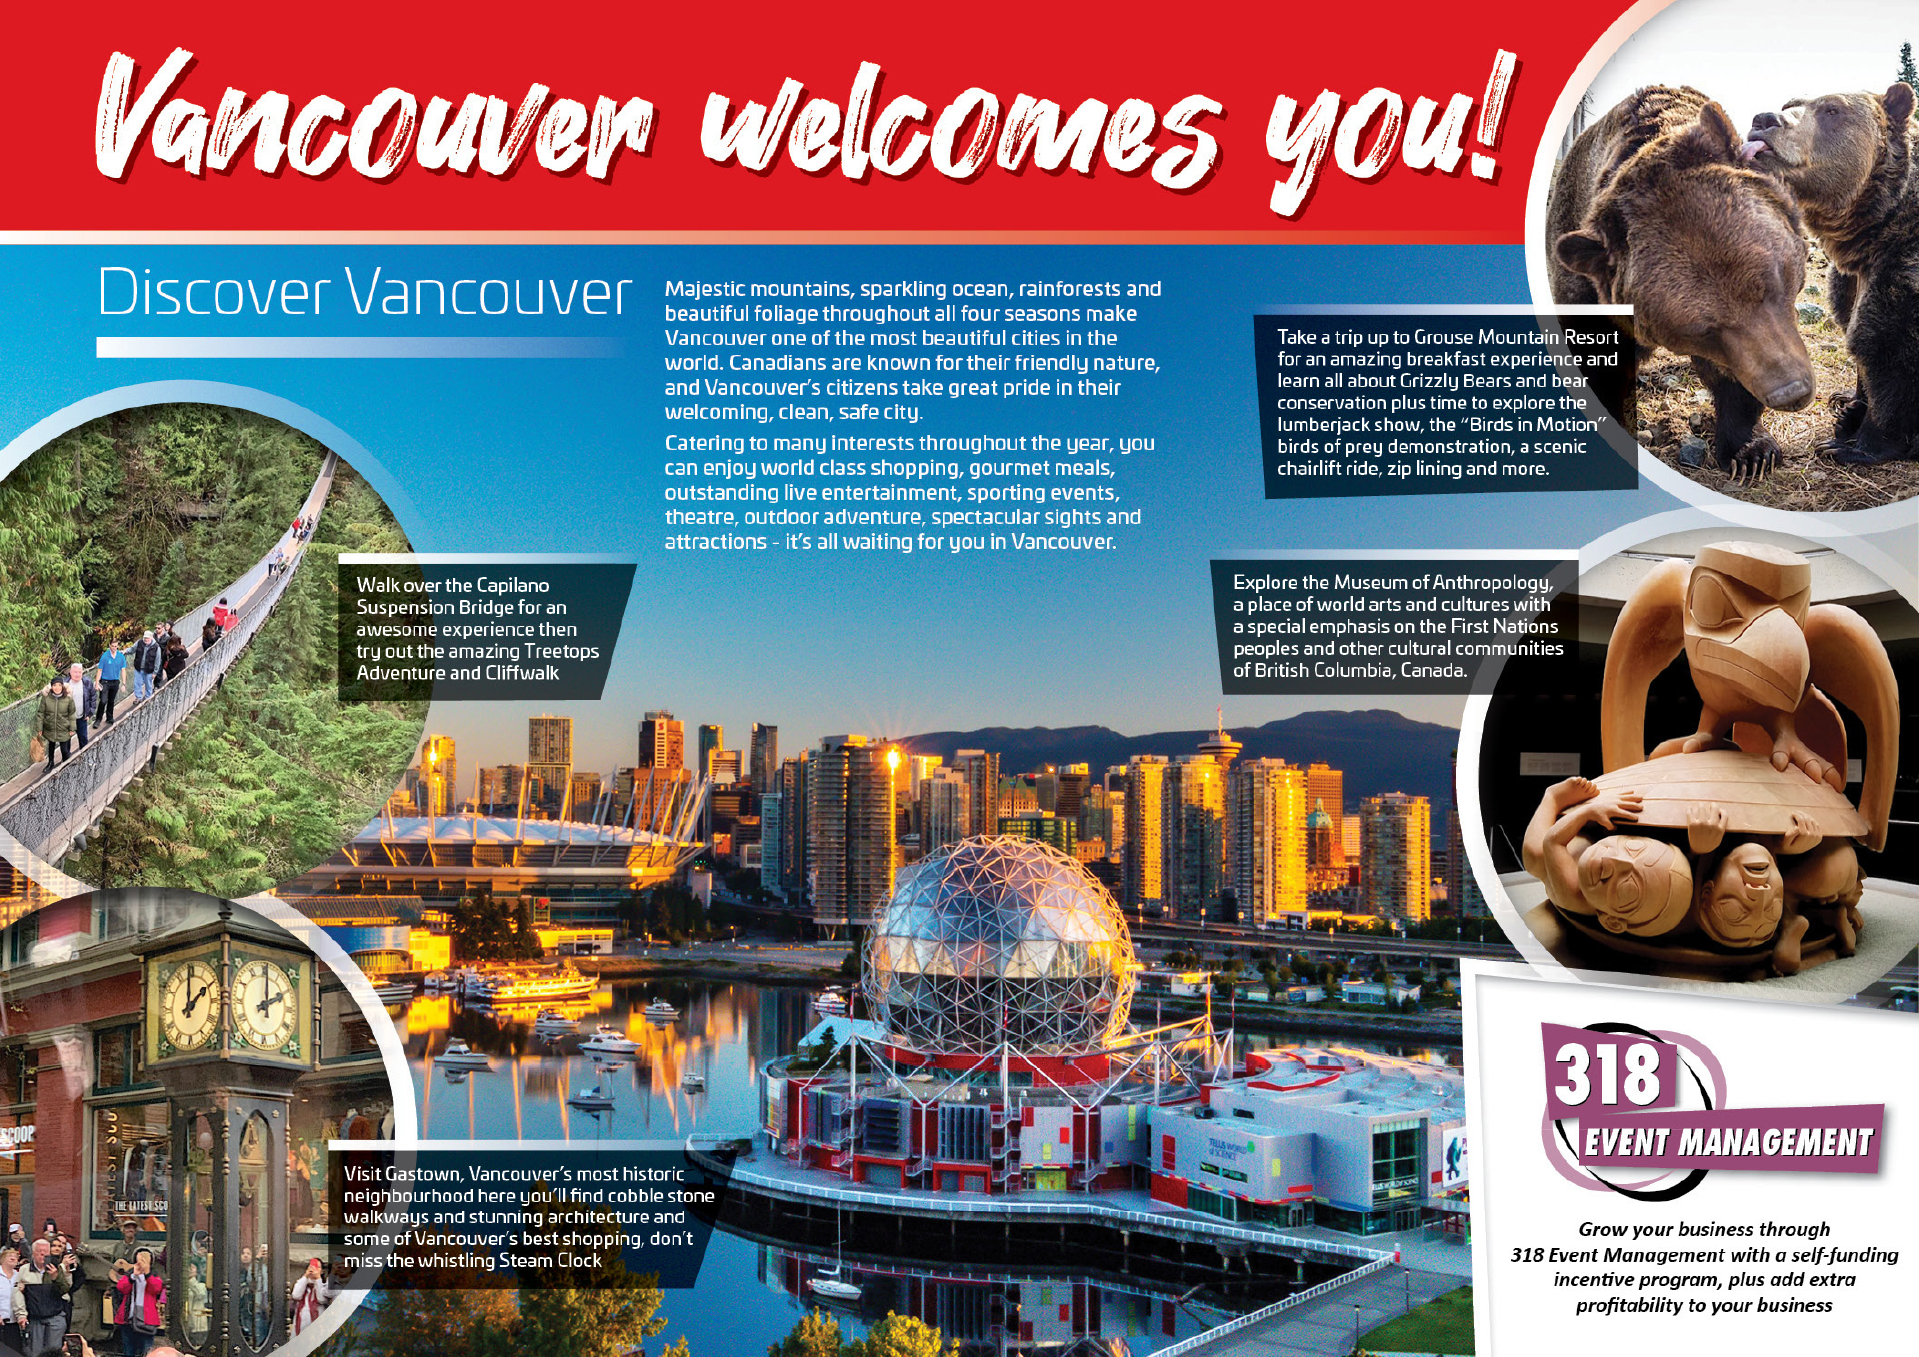 Vancouver welcomes you